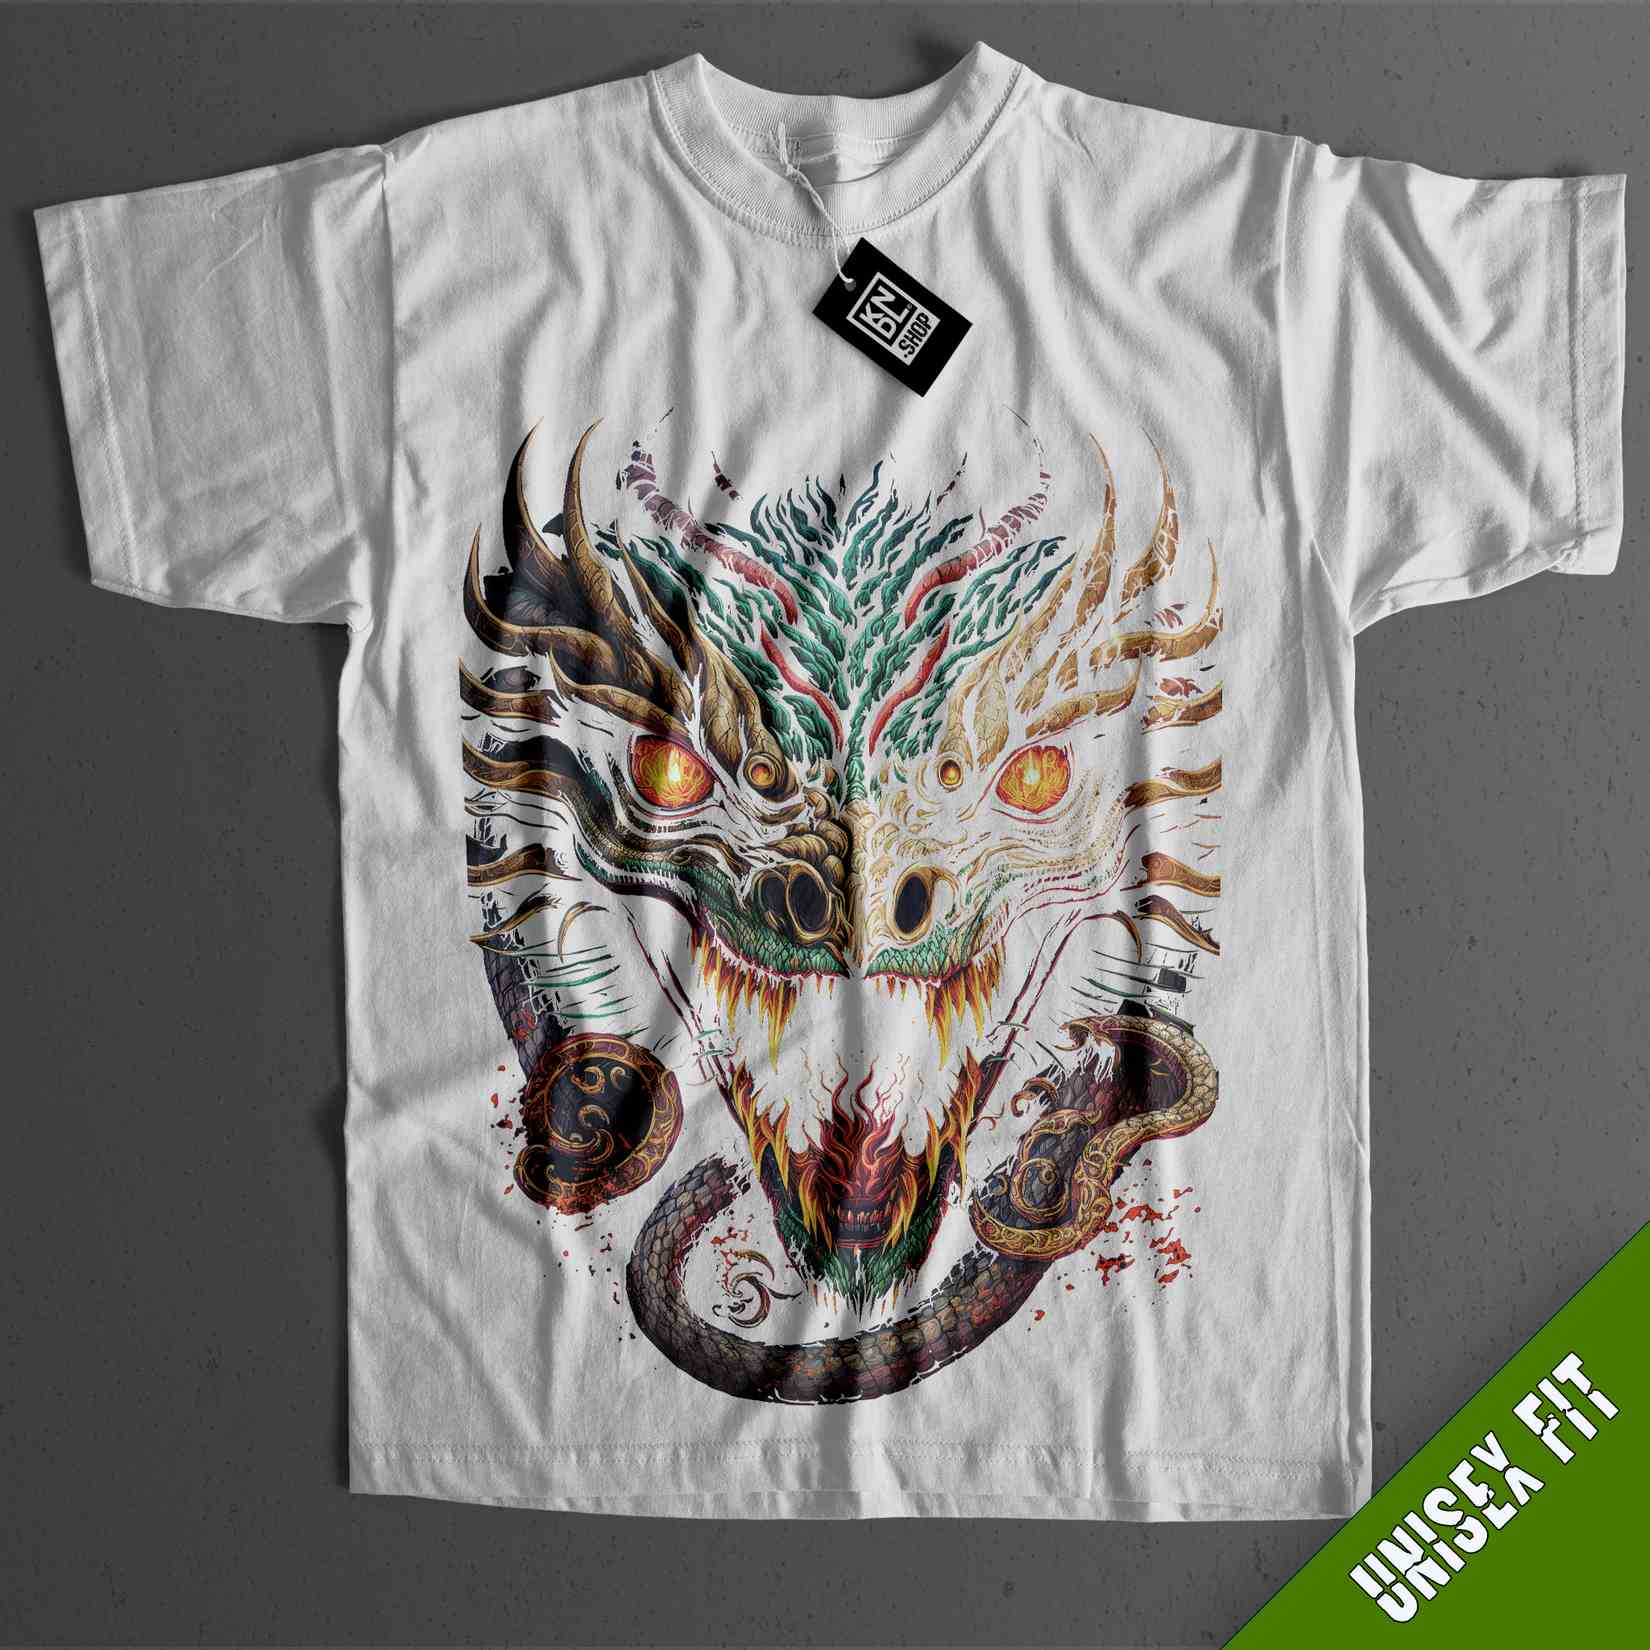 a white t - shirt with an image of a dragon on it